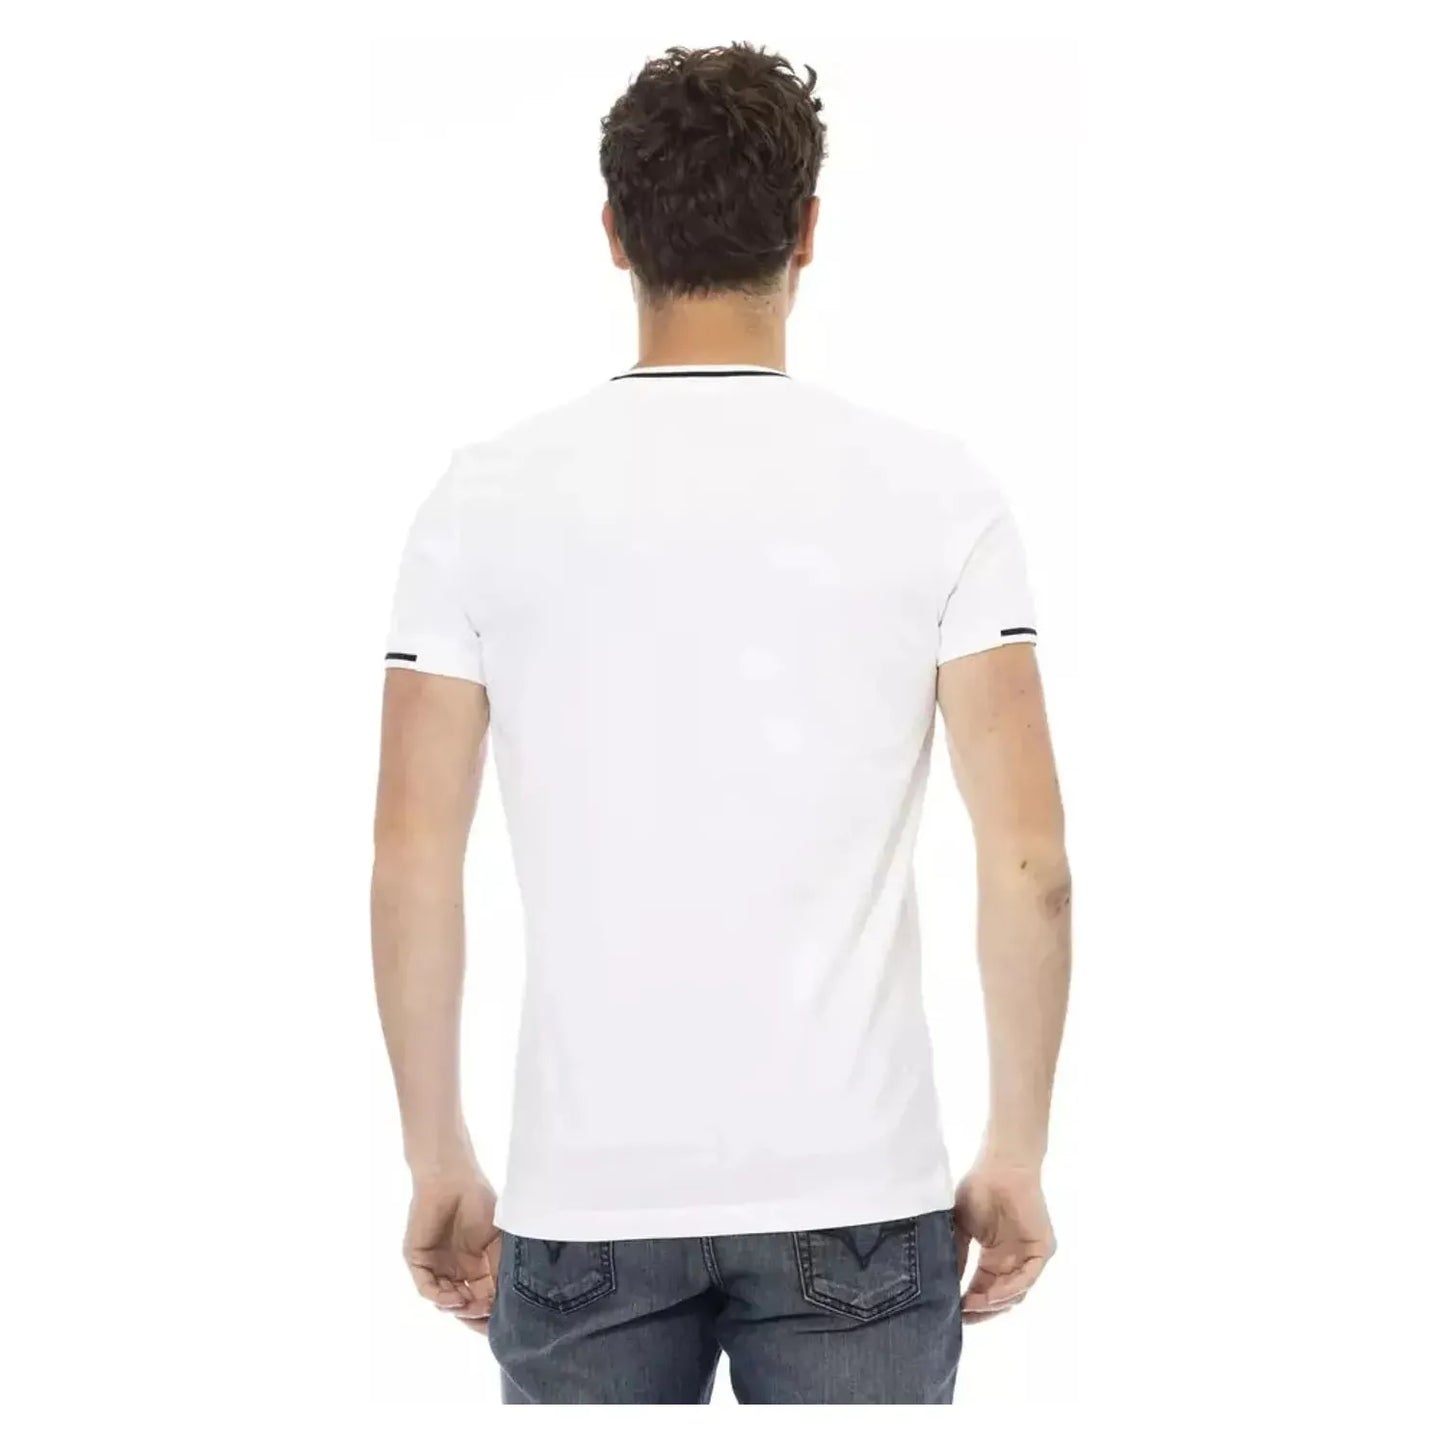 Trussardi Action Elegant White Tee with Artful Front Print white-cotton-t-shirt-29 product-22750-1274523310-23-f1dc7b3a-812.webp